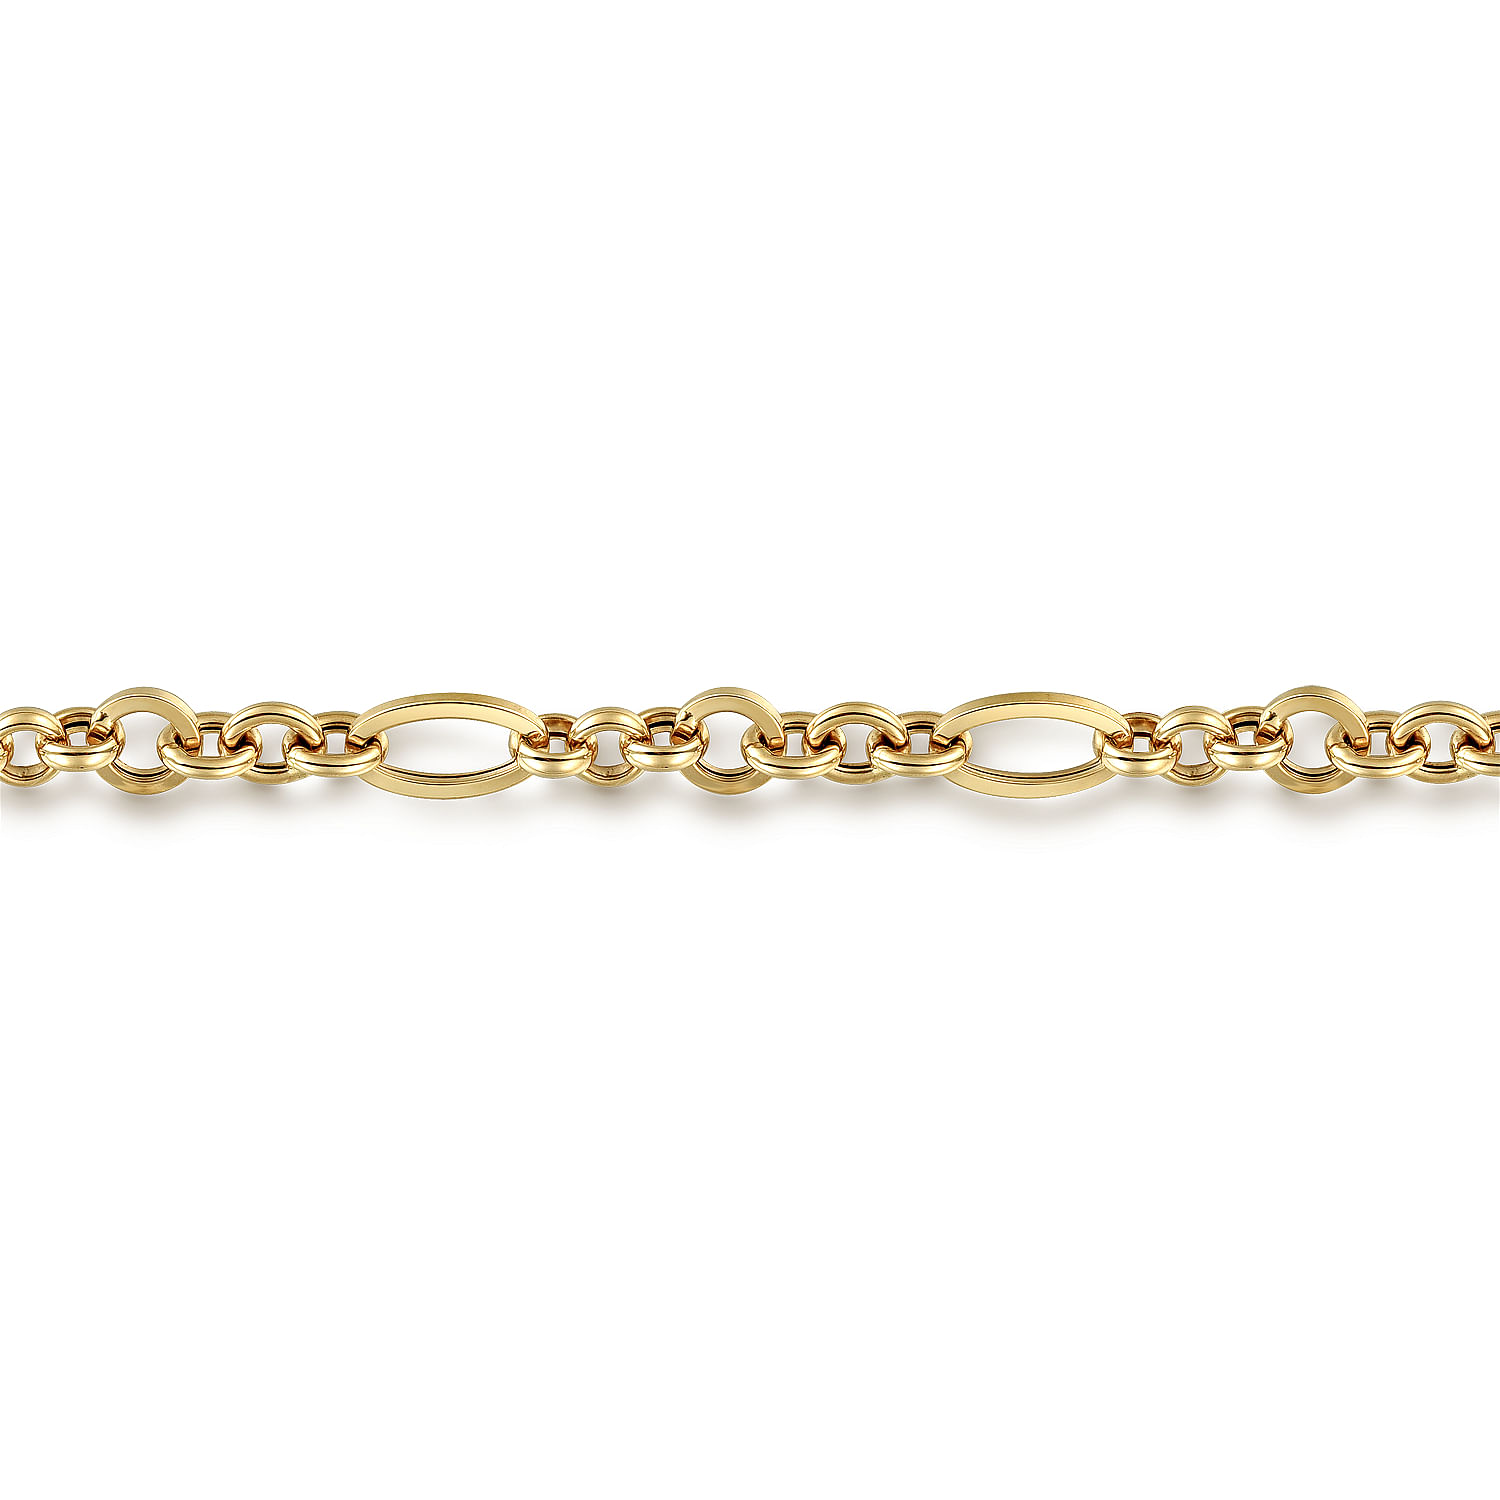 7 inch 14K Yellow Gold Hollow Figaro Link Chain Bracelet